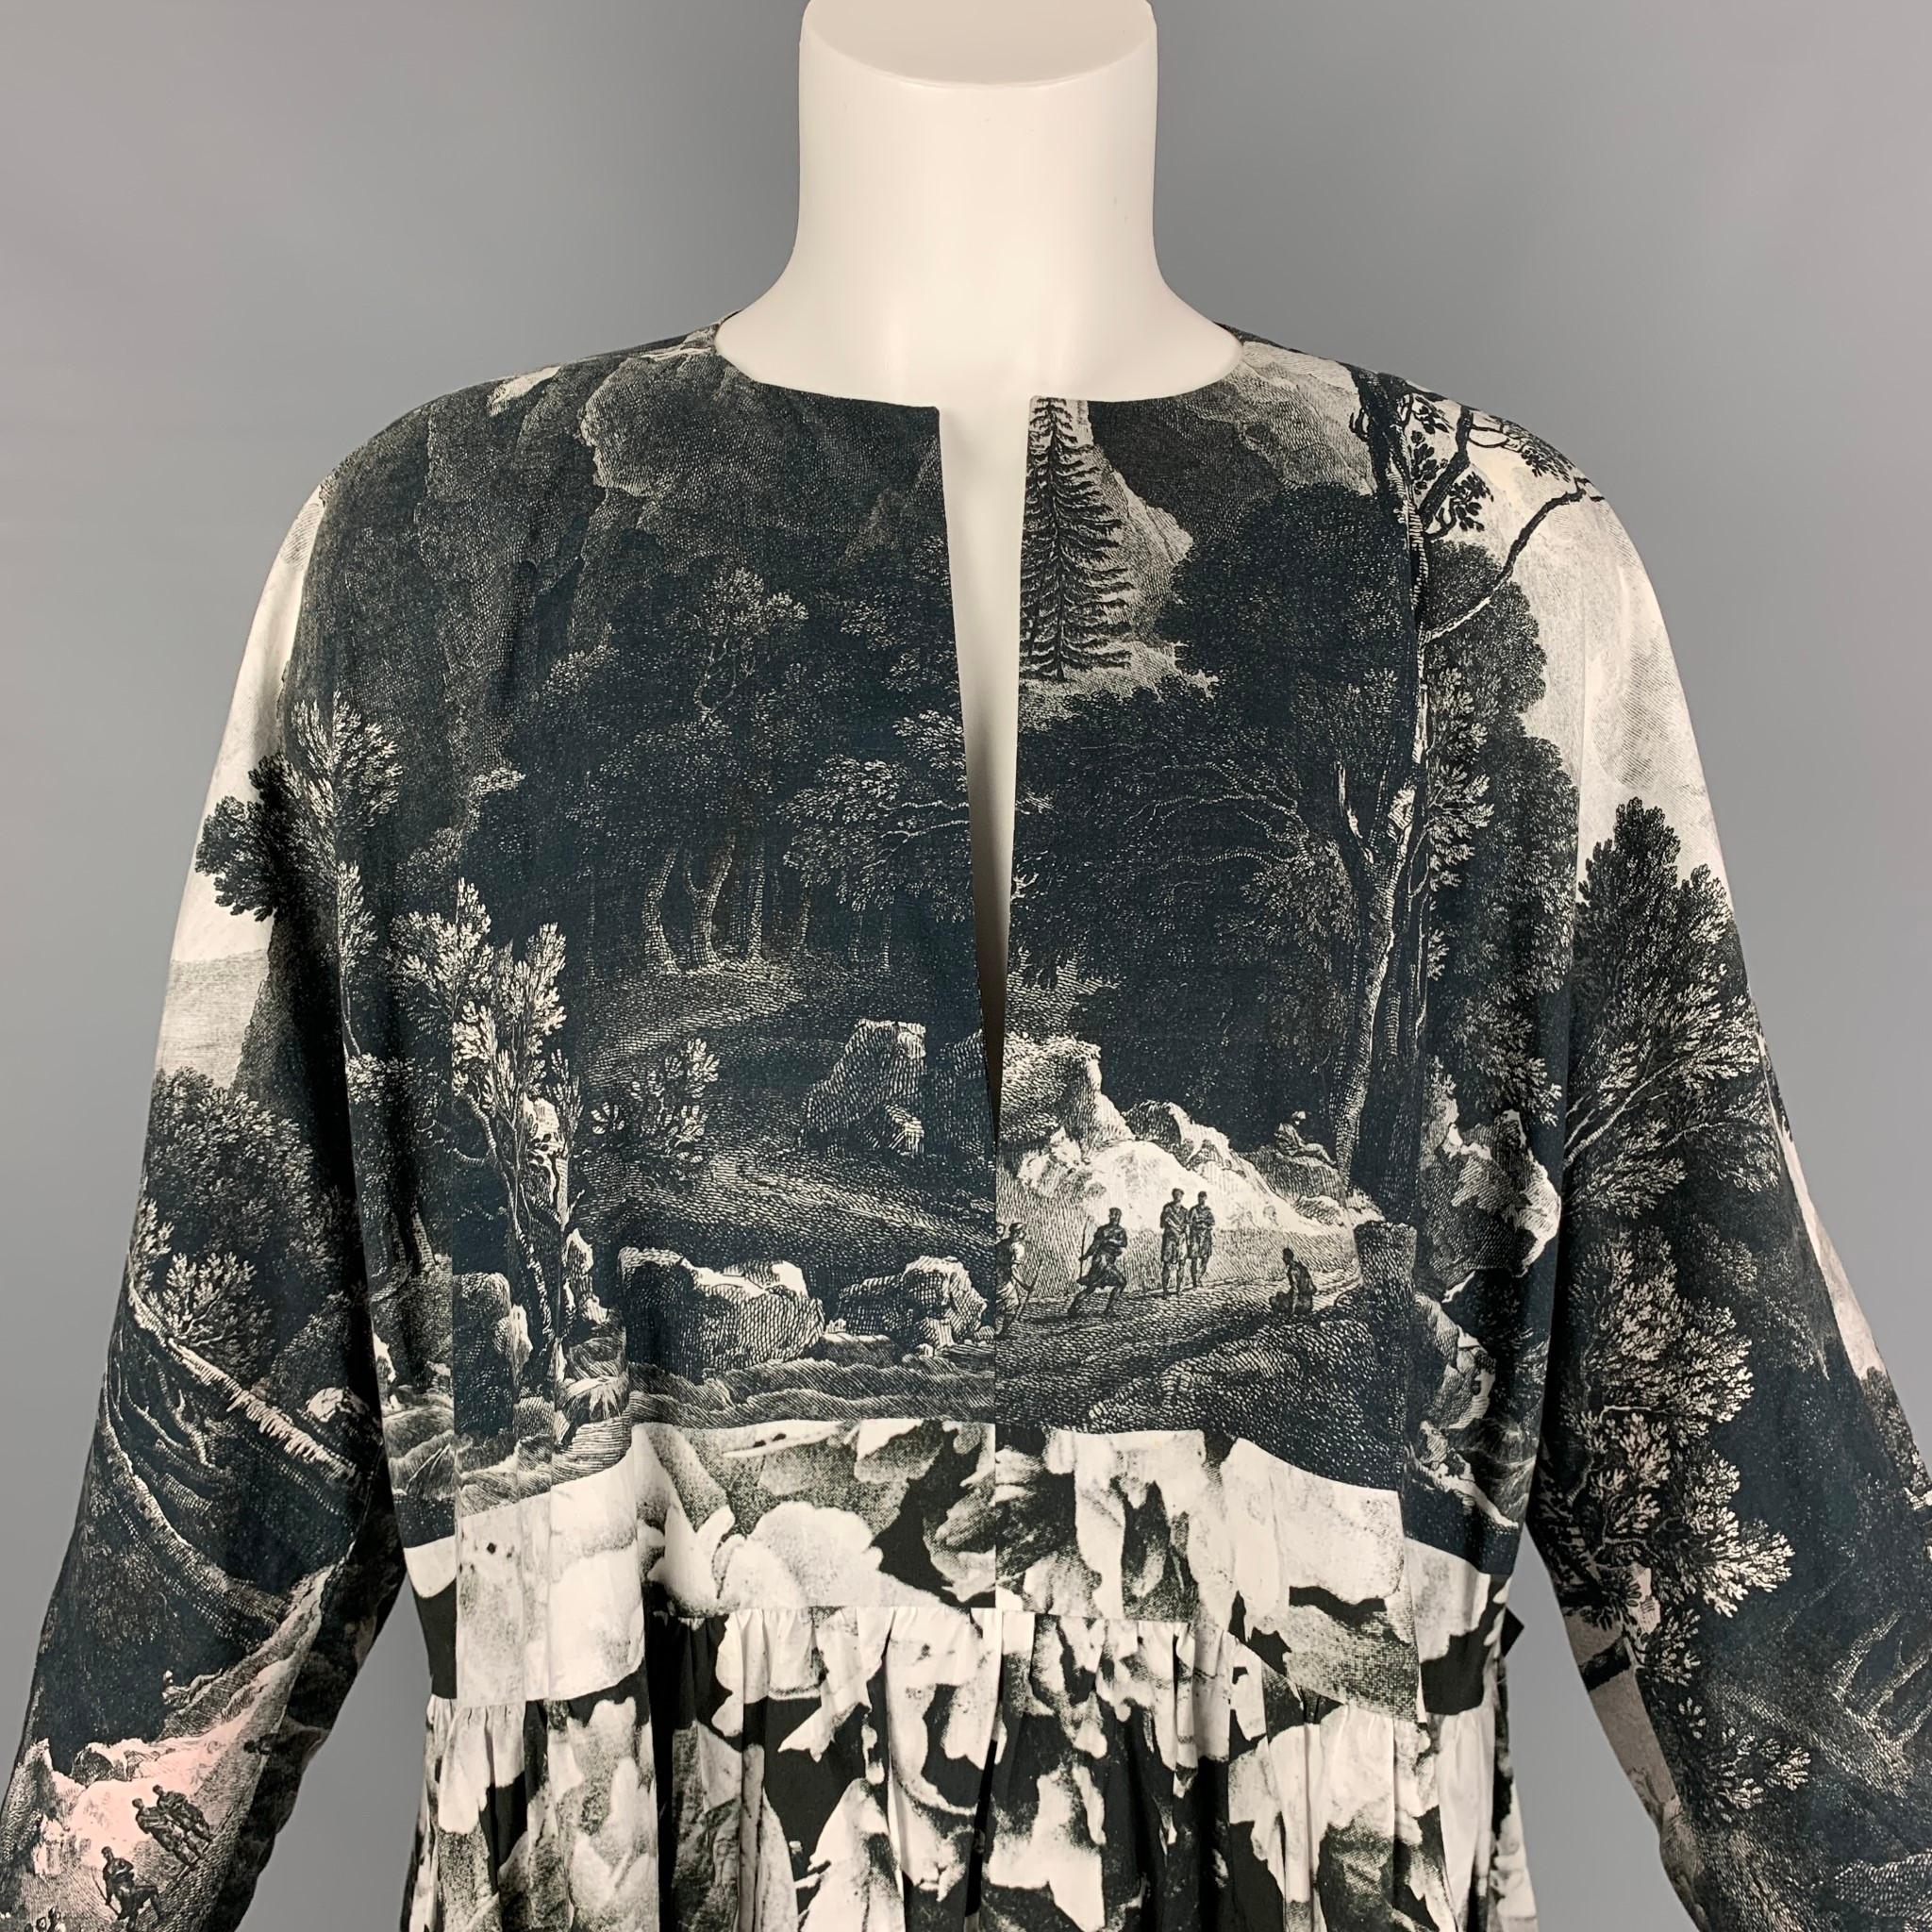 DRIES VAN NOTEN Spring 2012 dress comes in a charcoal & white tapestry cotton featuring a oversized fit, pleated style, 3/4 sleeves, and a v-neck. 

Very Good Pre-Owned Condition.
Marked: S

Measurements:

Shoulder: 23 in.
Bust: 54 in.
Waist: 48